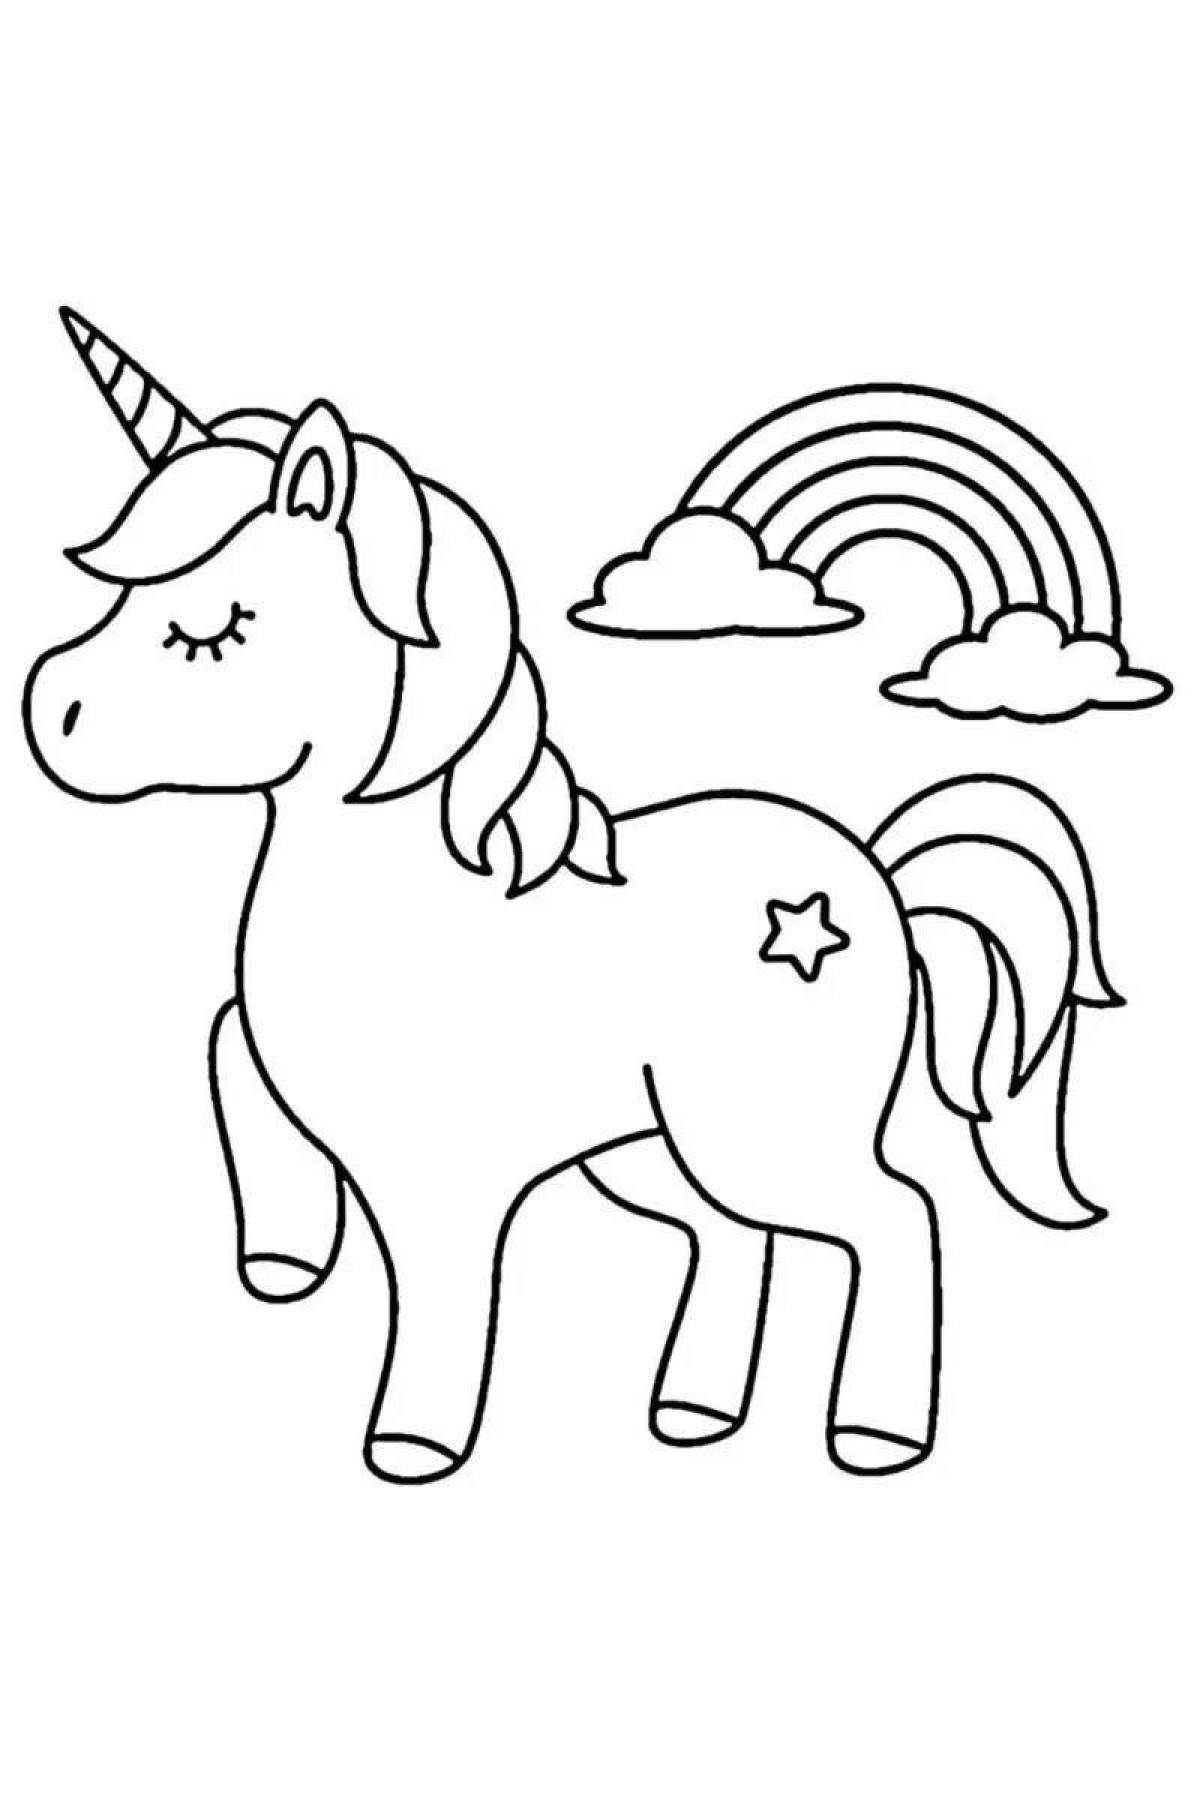 Unicorn drawing for kids #4